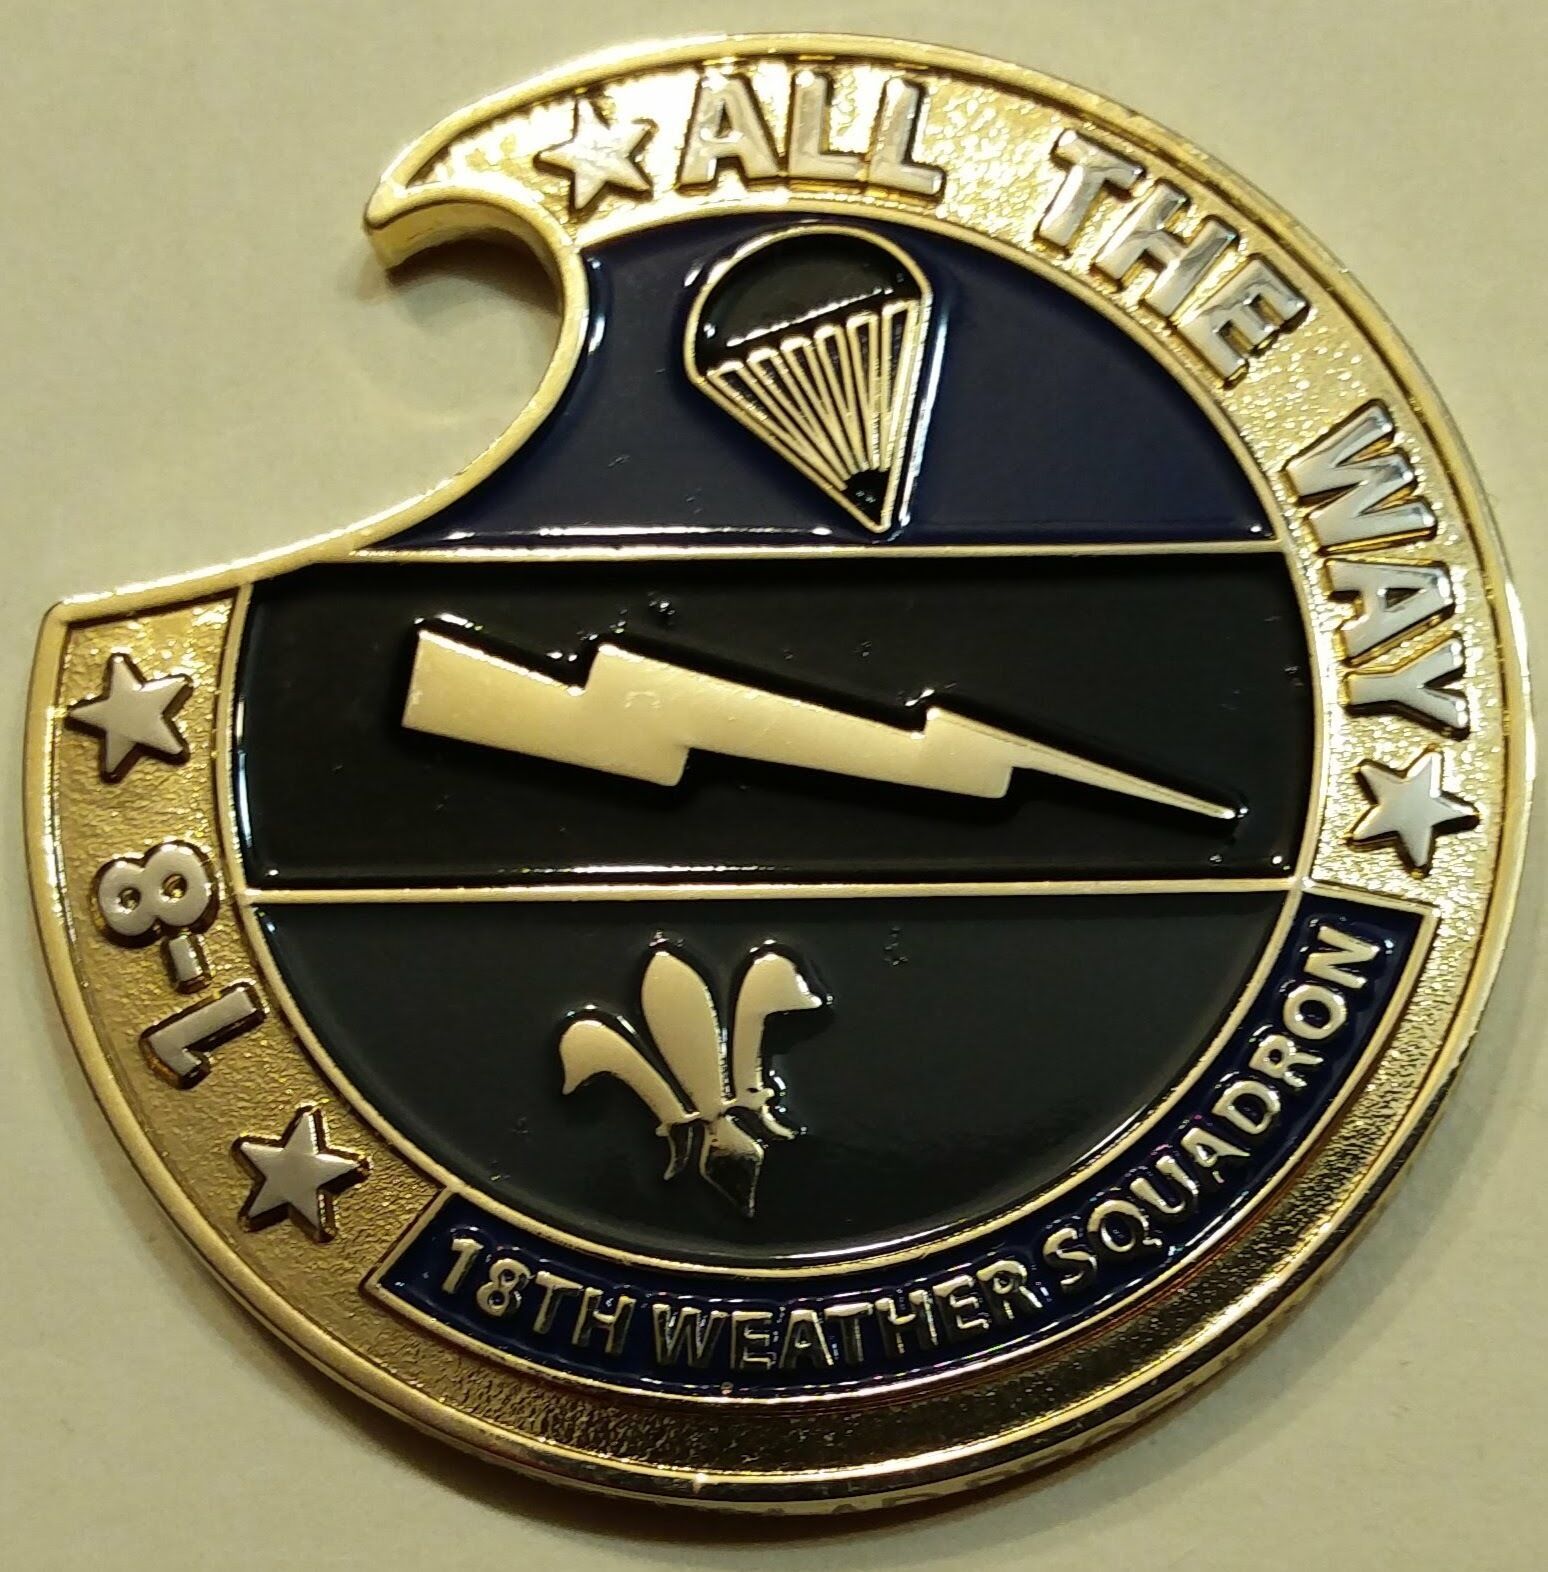 18th Weather Sq Special Operations Combat Weather Air Force Challenge Coin